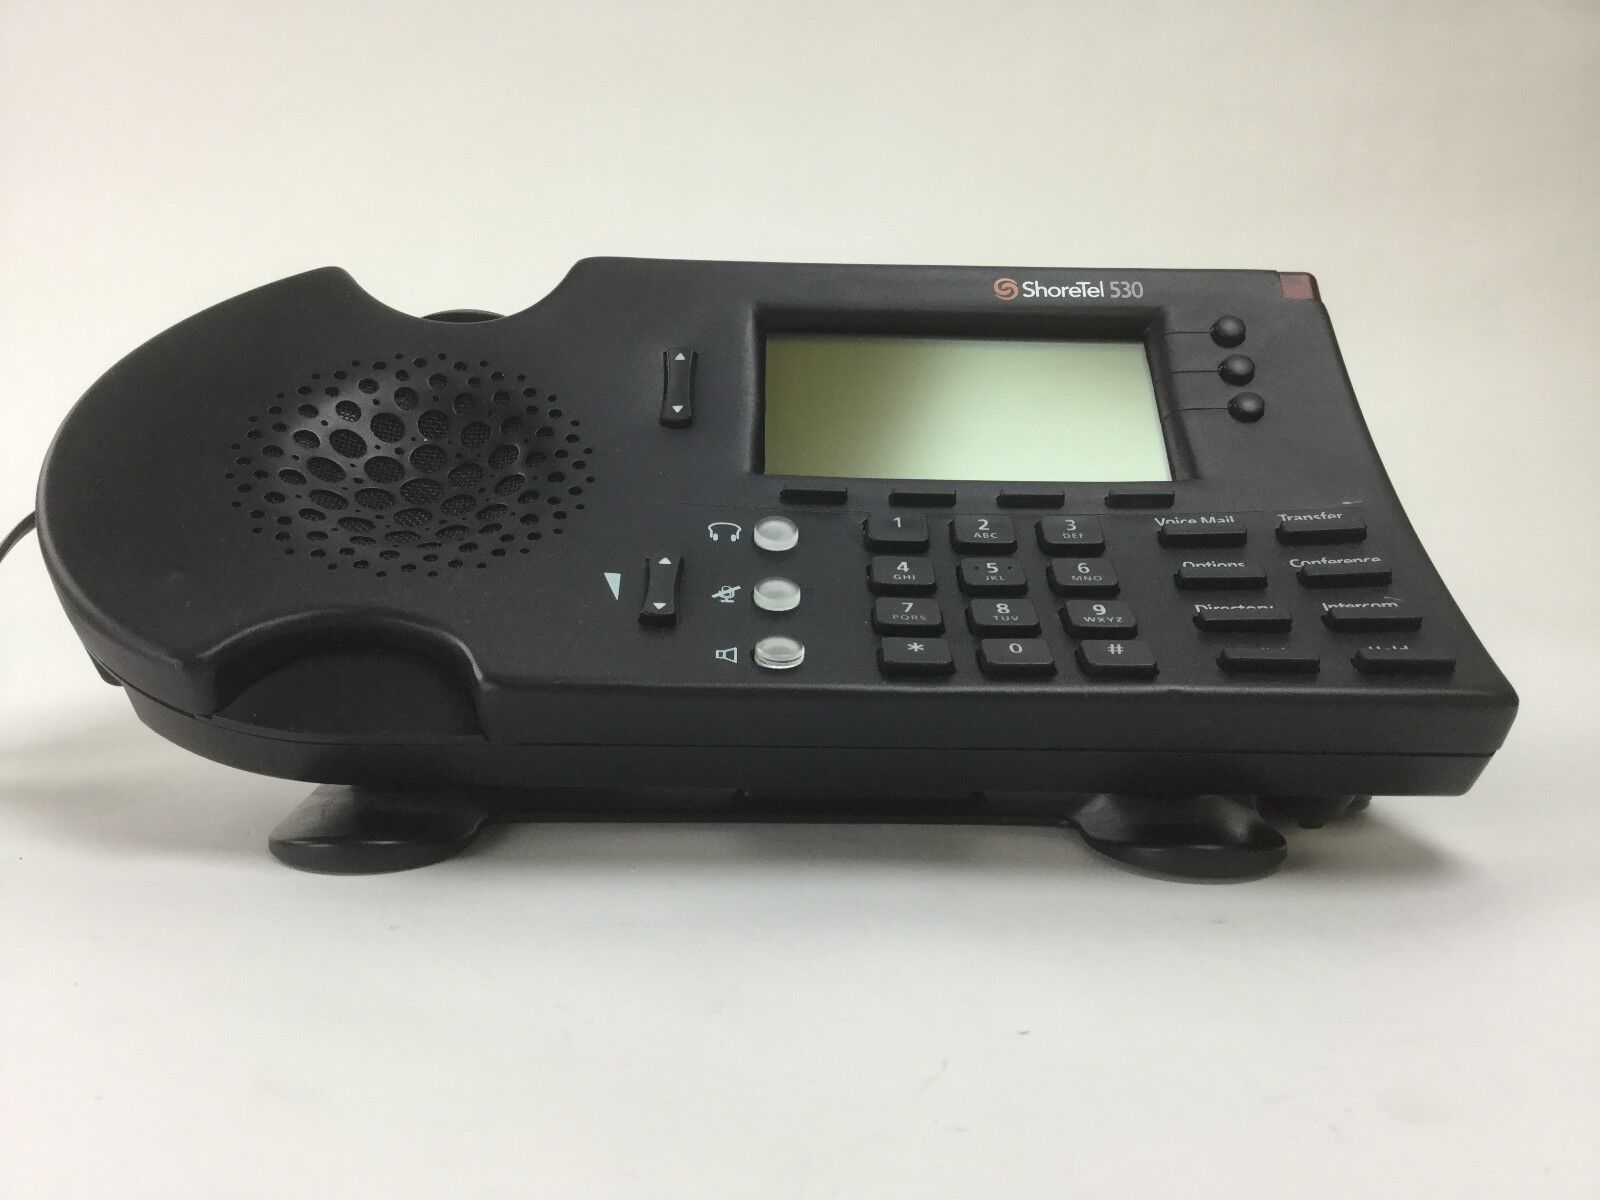 SHORETEL IP 530 S2 Phone, Includes Handset and Stand